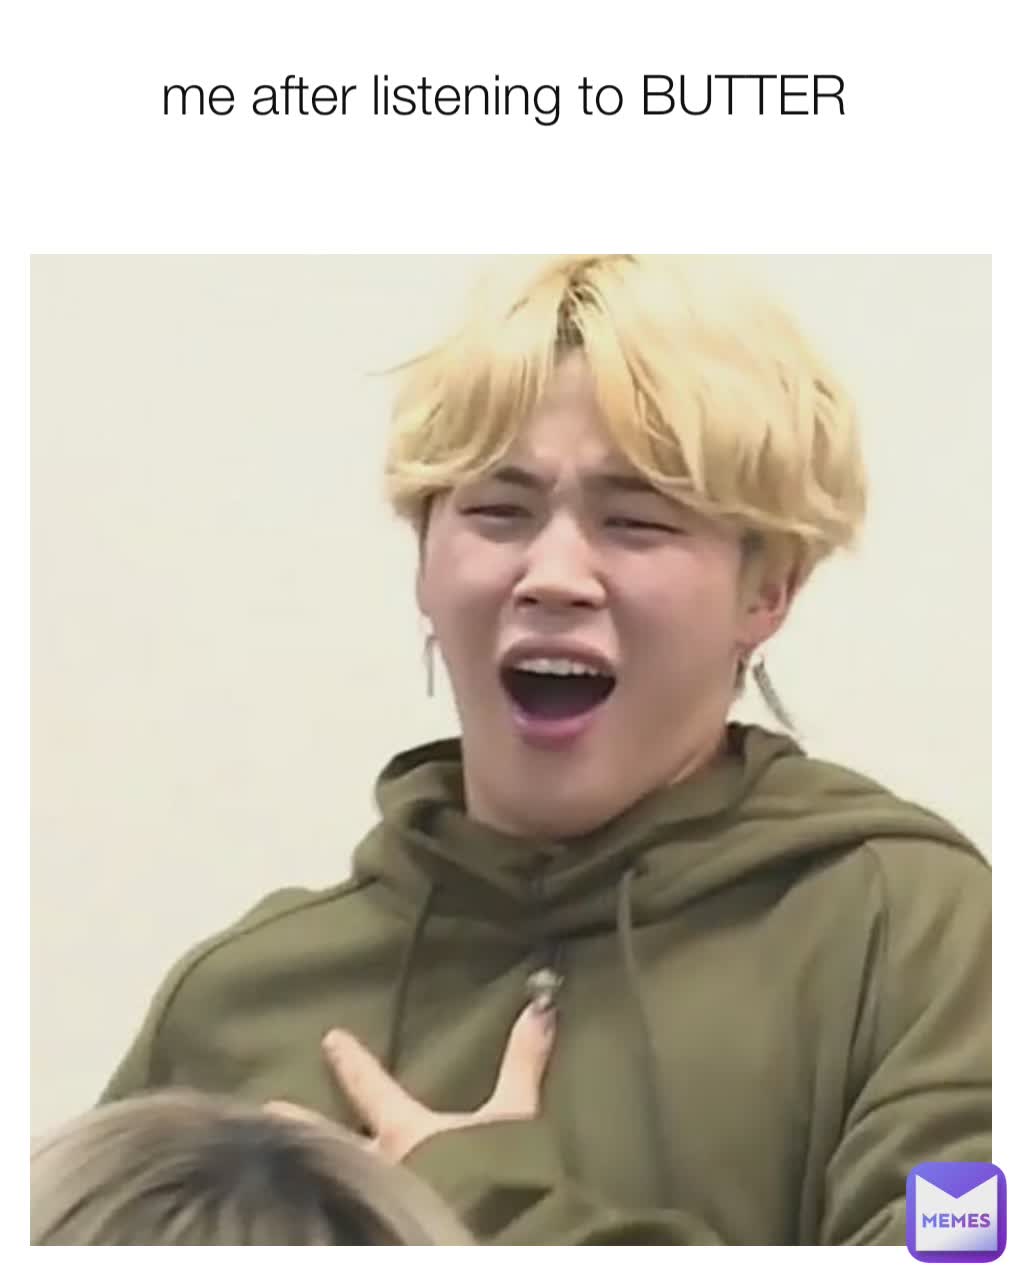 me after listening to BUTTER | @btsarmy_1526 | Memes